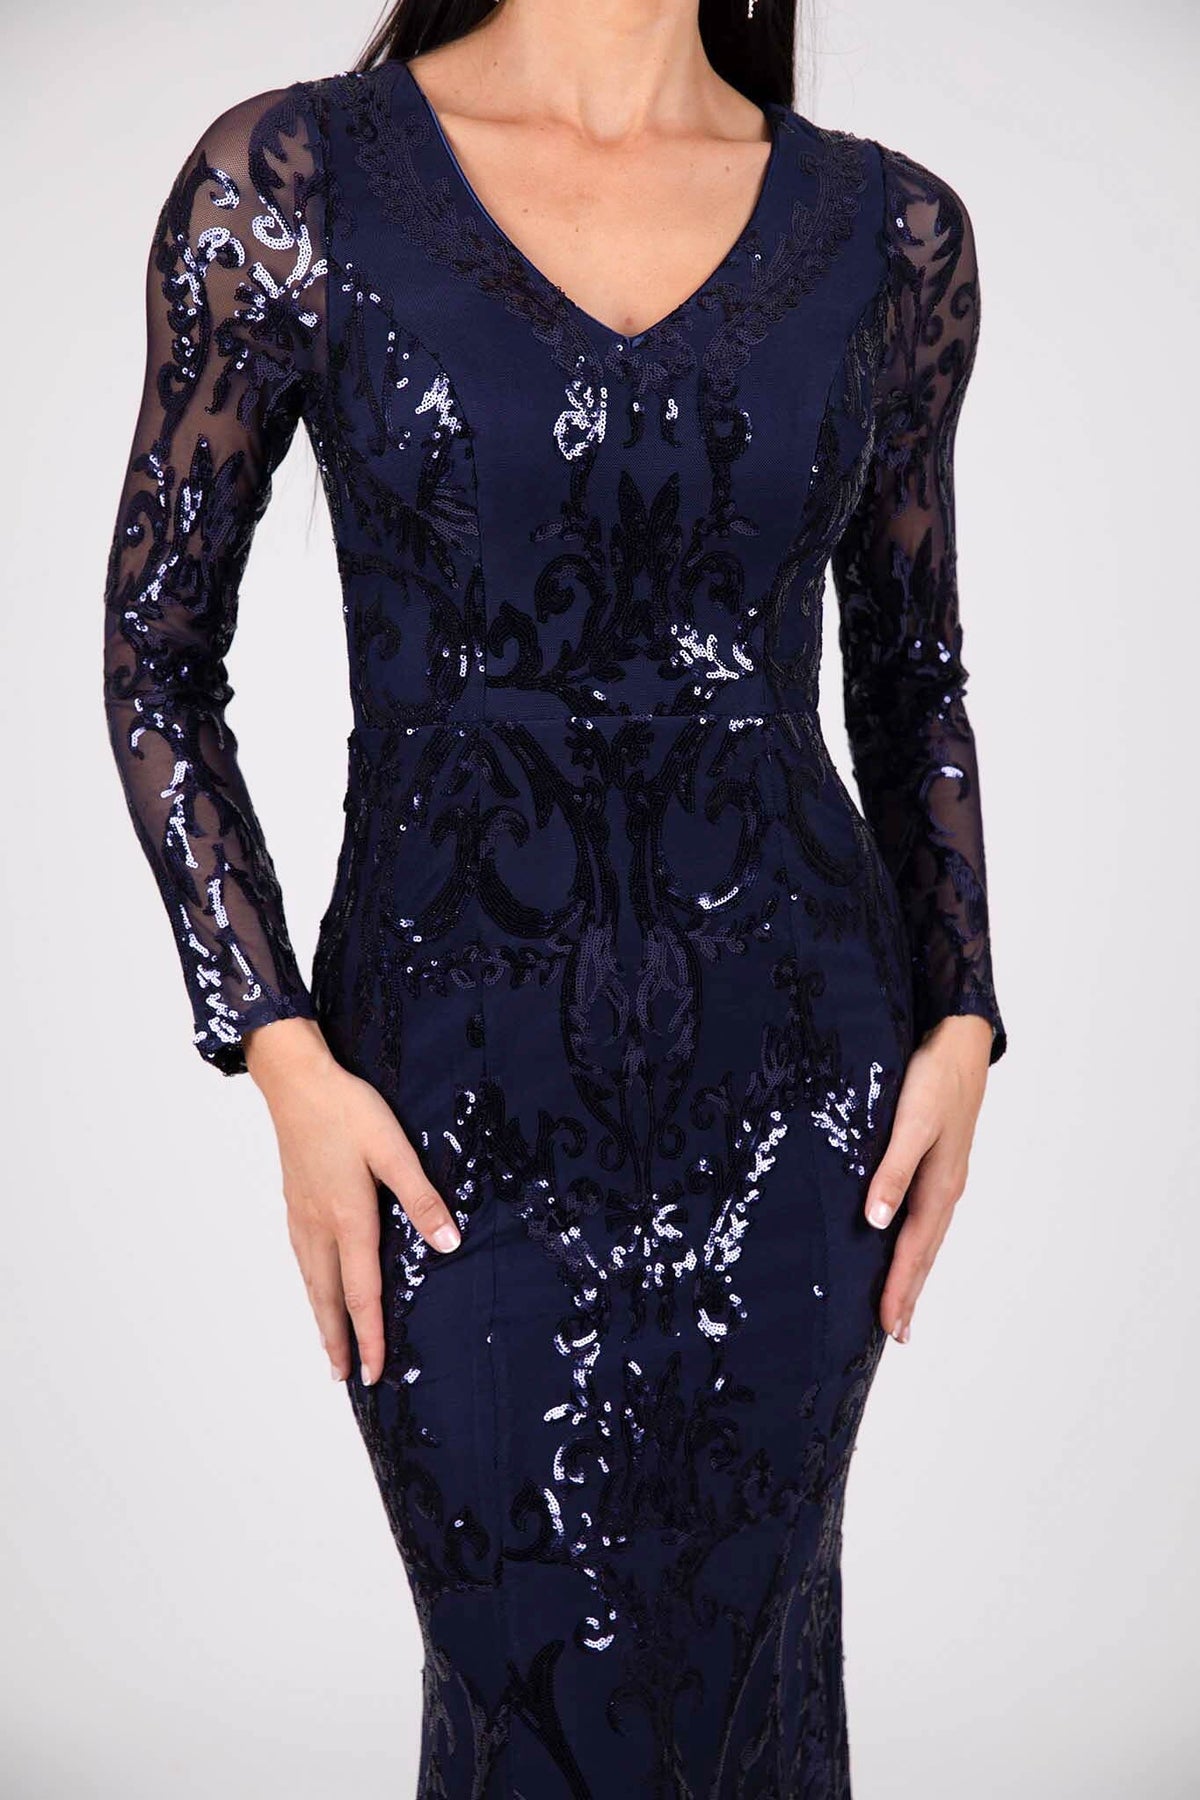 Close Up Fabric Image of Deep Blue Pattern Sequin Fitted Evening Gown with Long Sleeves and V Neckline